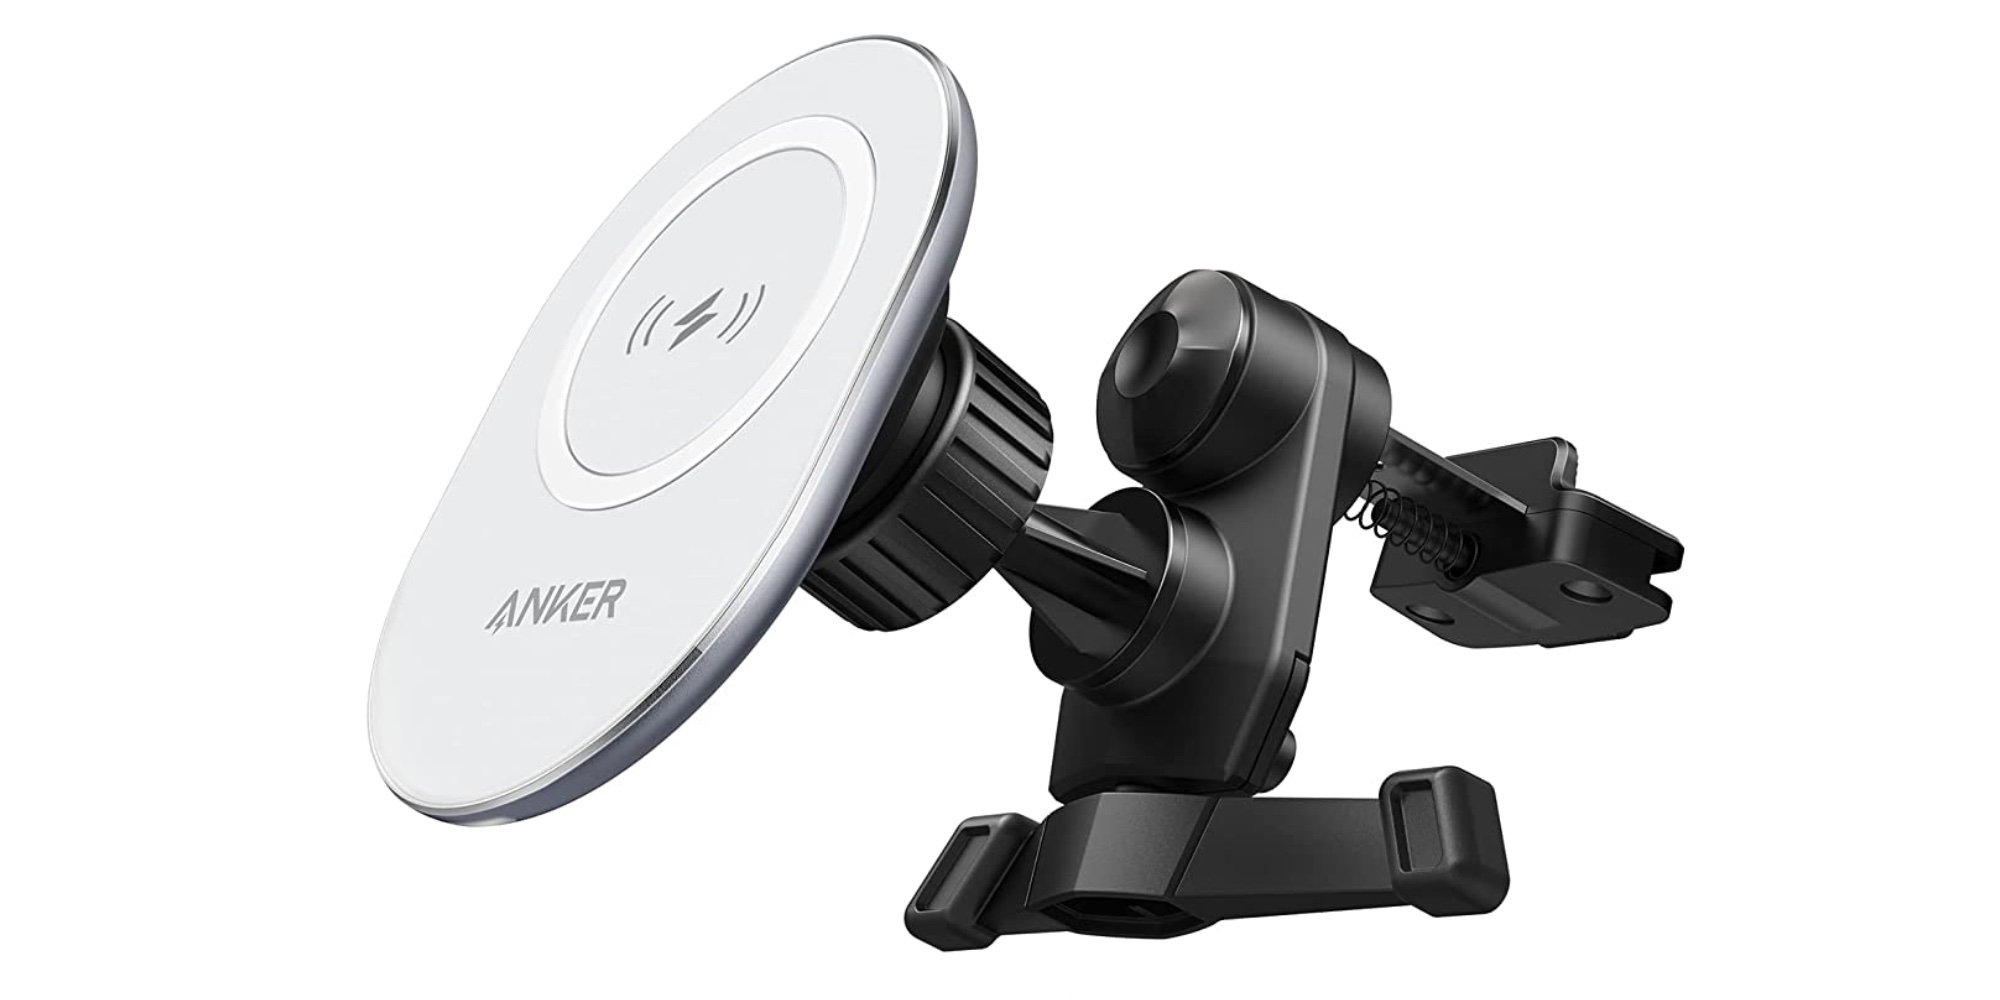 Anker MagSafe Mount debuts as latest PowerWave release - 9to5Toys